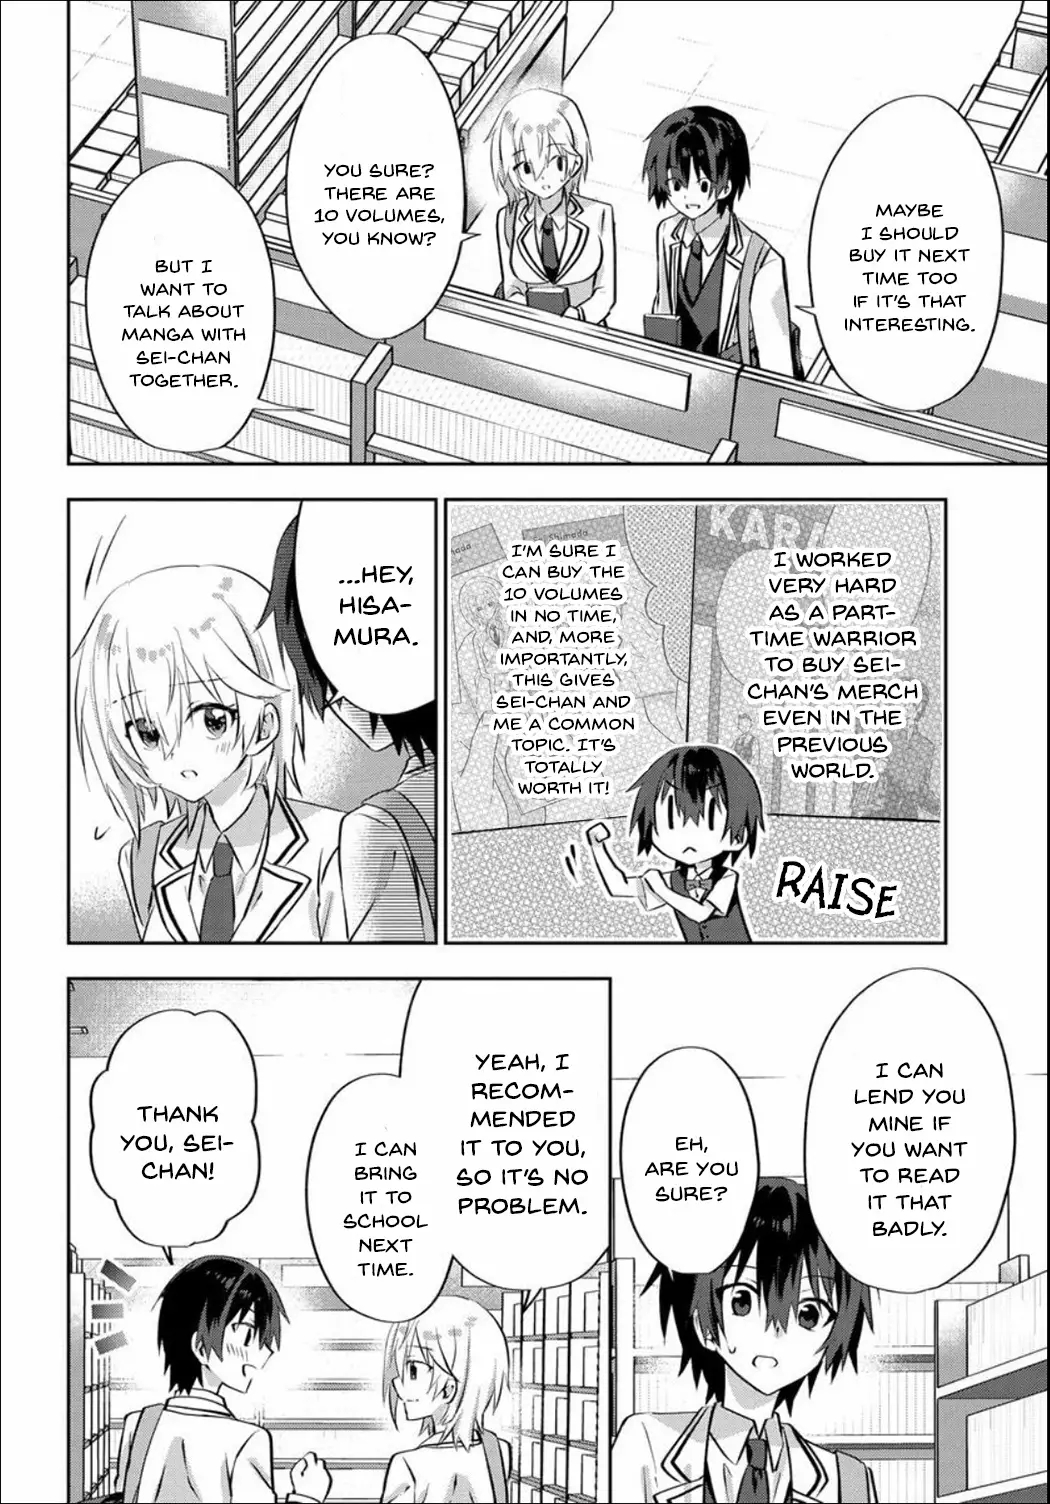 Since I’Ve Entered The World Of Romantic Comedy Manga, I’Ll Do My Best To Make The Losing Heroine Happy - 5.1 page 4-30cebf5f